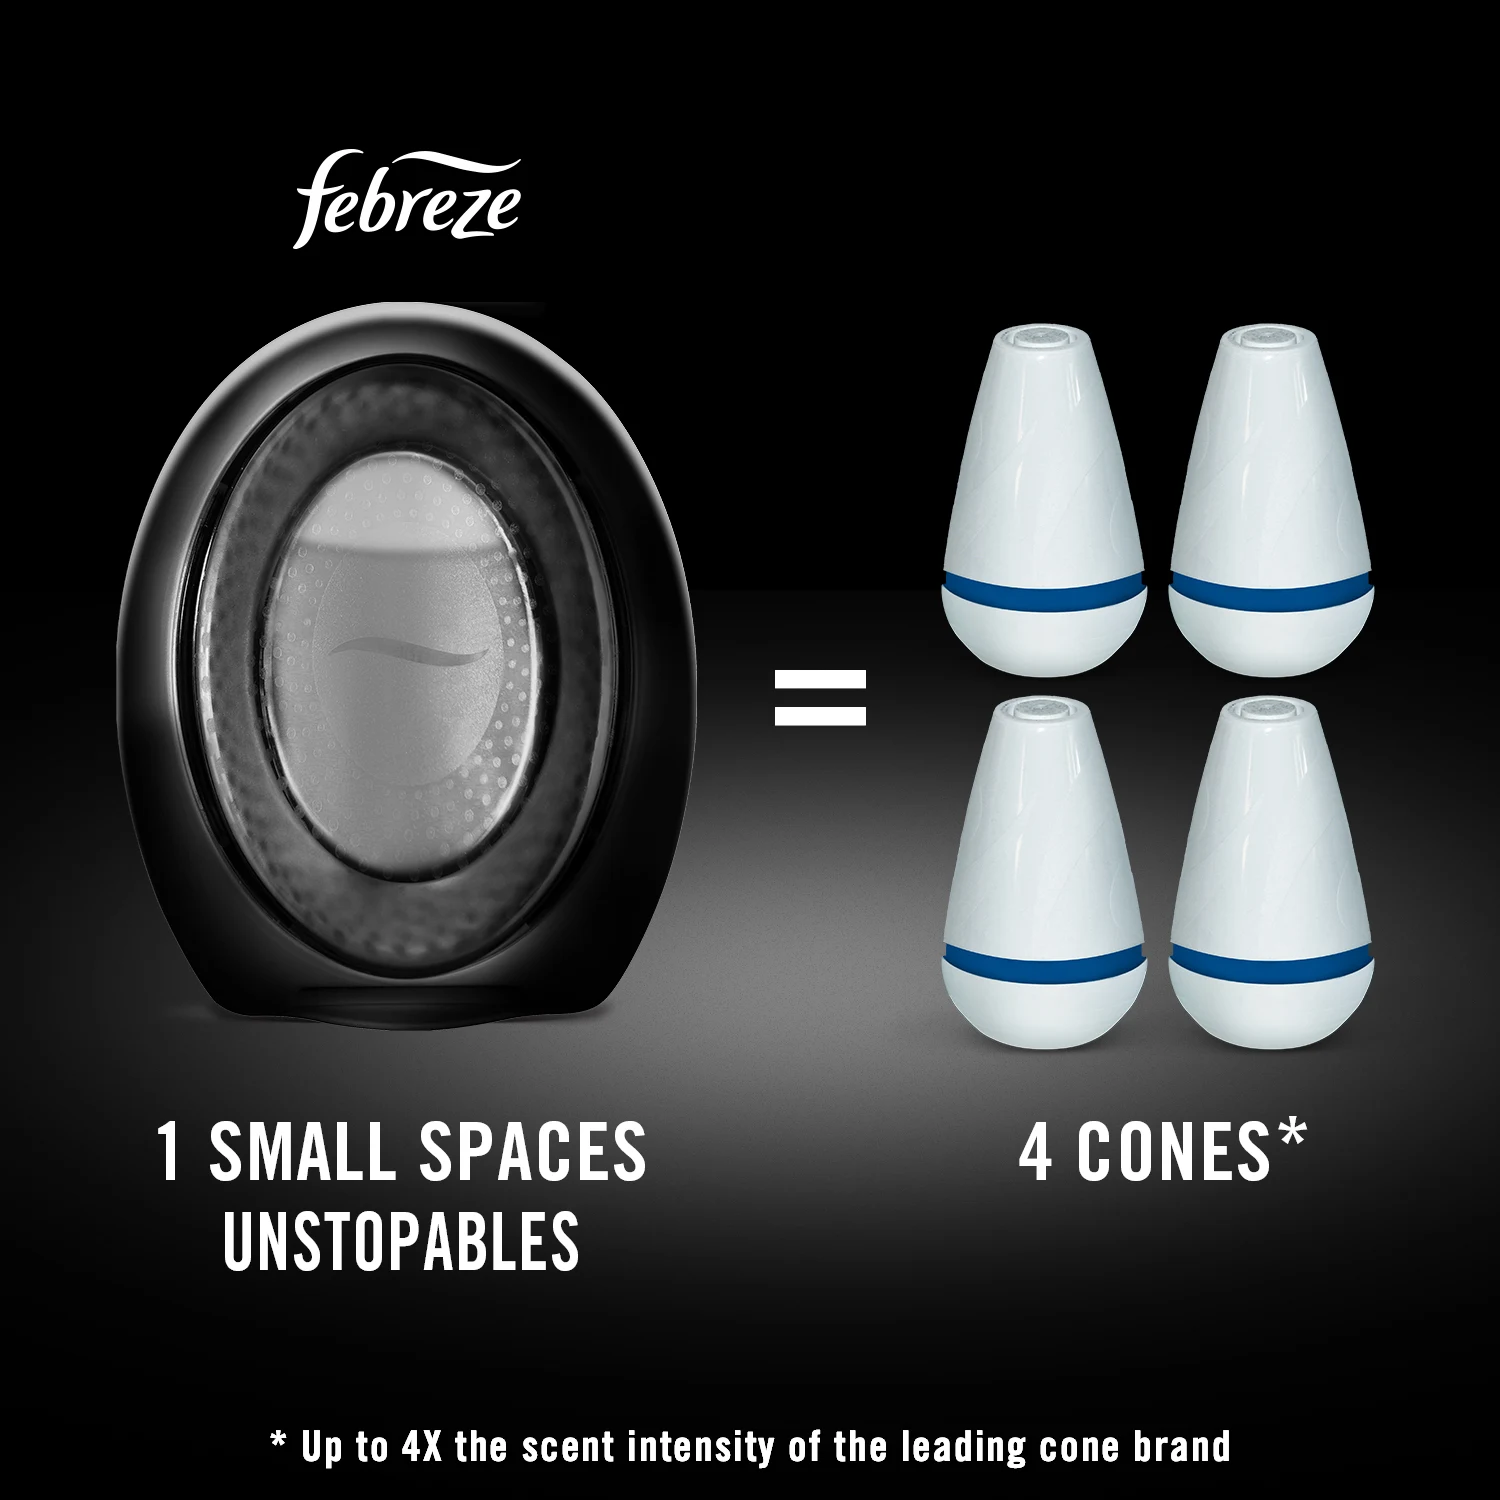 1 SMALL SPACES Unstopables = 4 cones, up to 4x the scent intensity of the leading cone brand